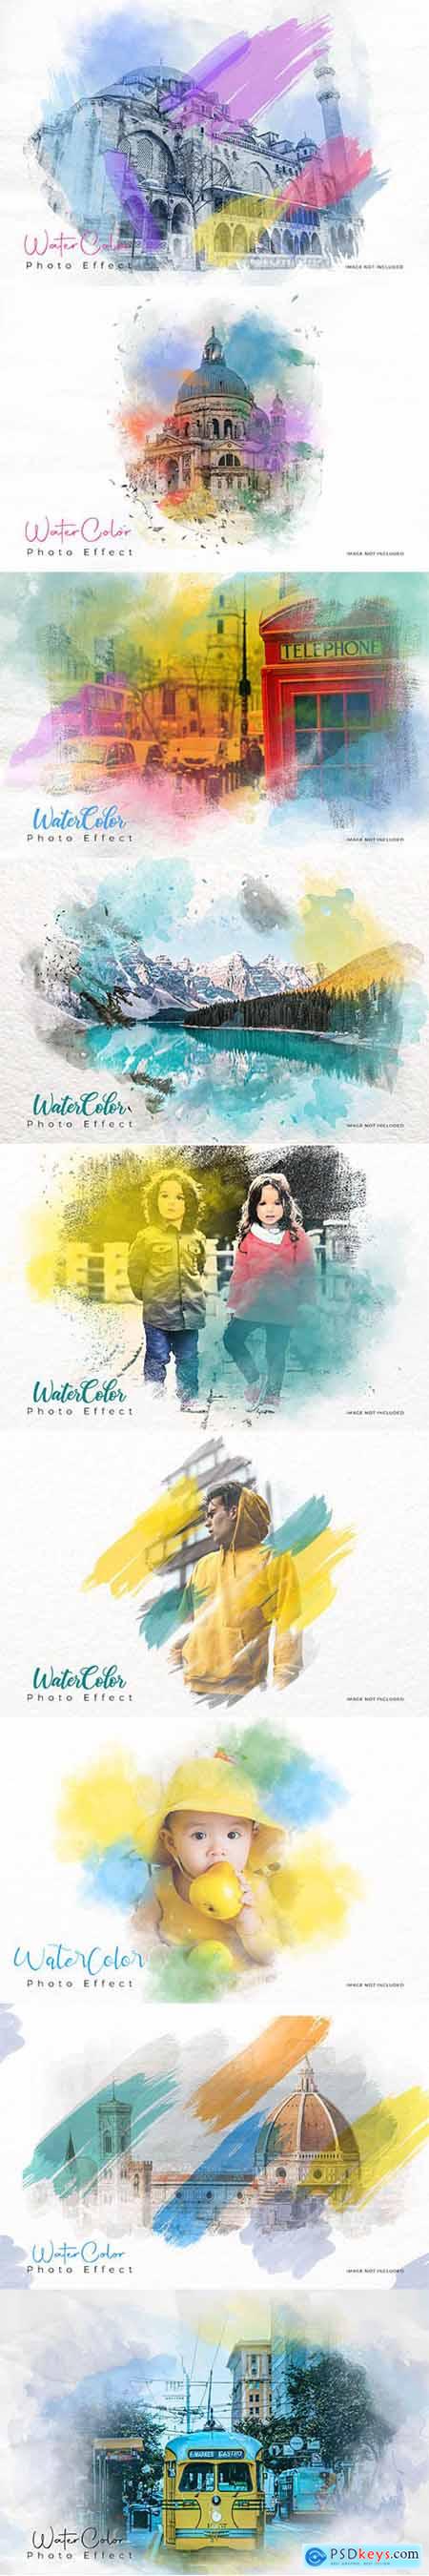 Watercolor painting photo effect